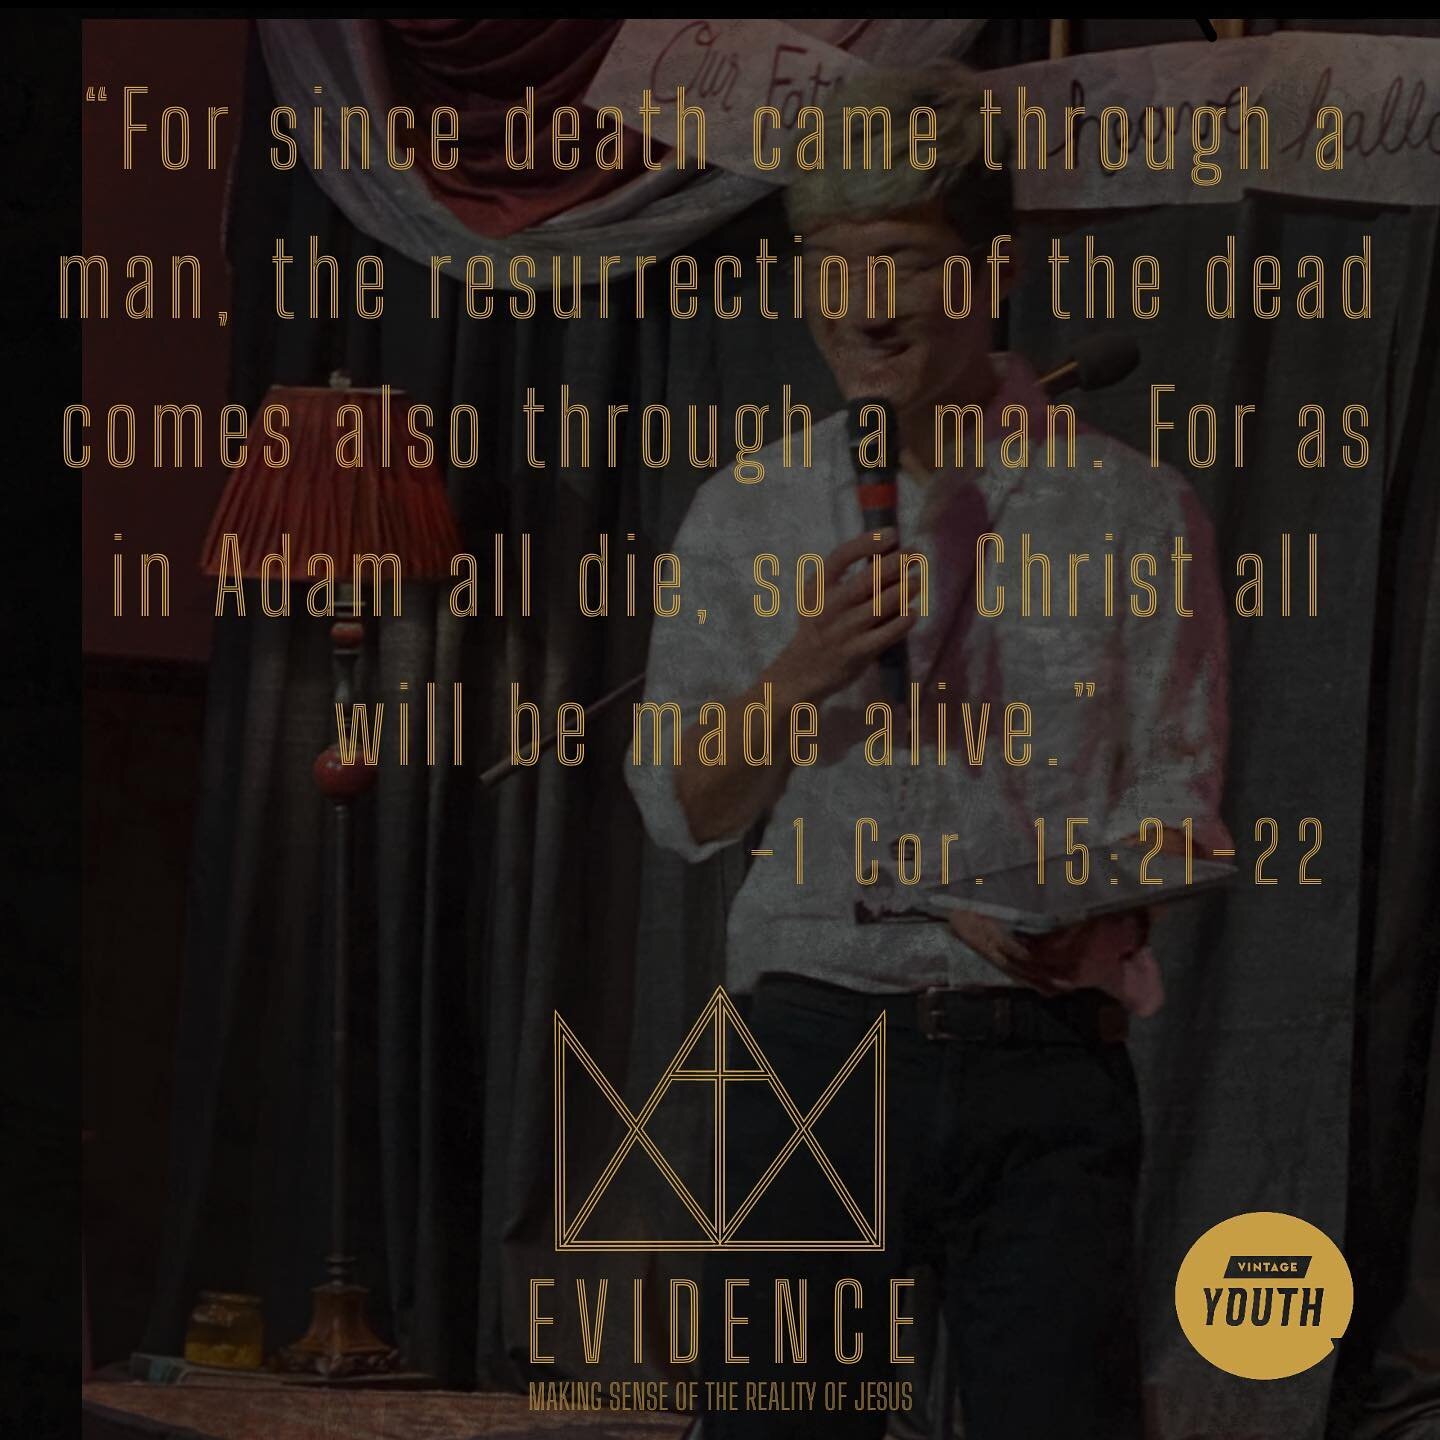 Last Wednesday we had a fantastic teaching where Jacob Lee walked us through the significance of the resurrection! Join us this Wednesday as we continue our EVIDENCE series talking through the death and resurrection of Jesus!! Register using the link